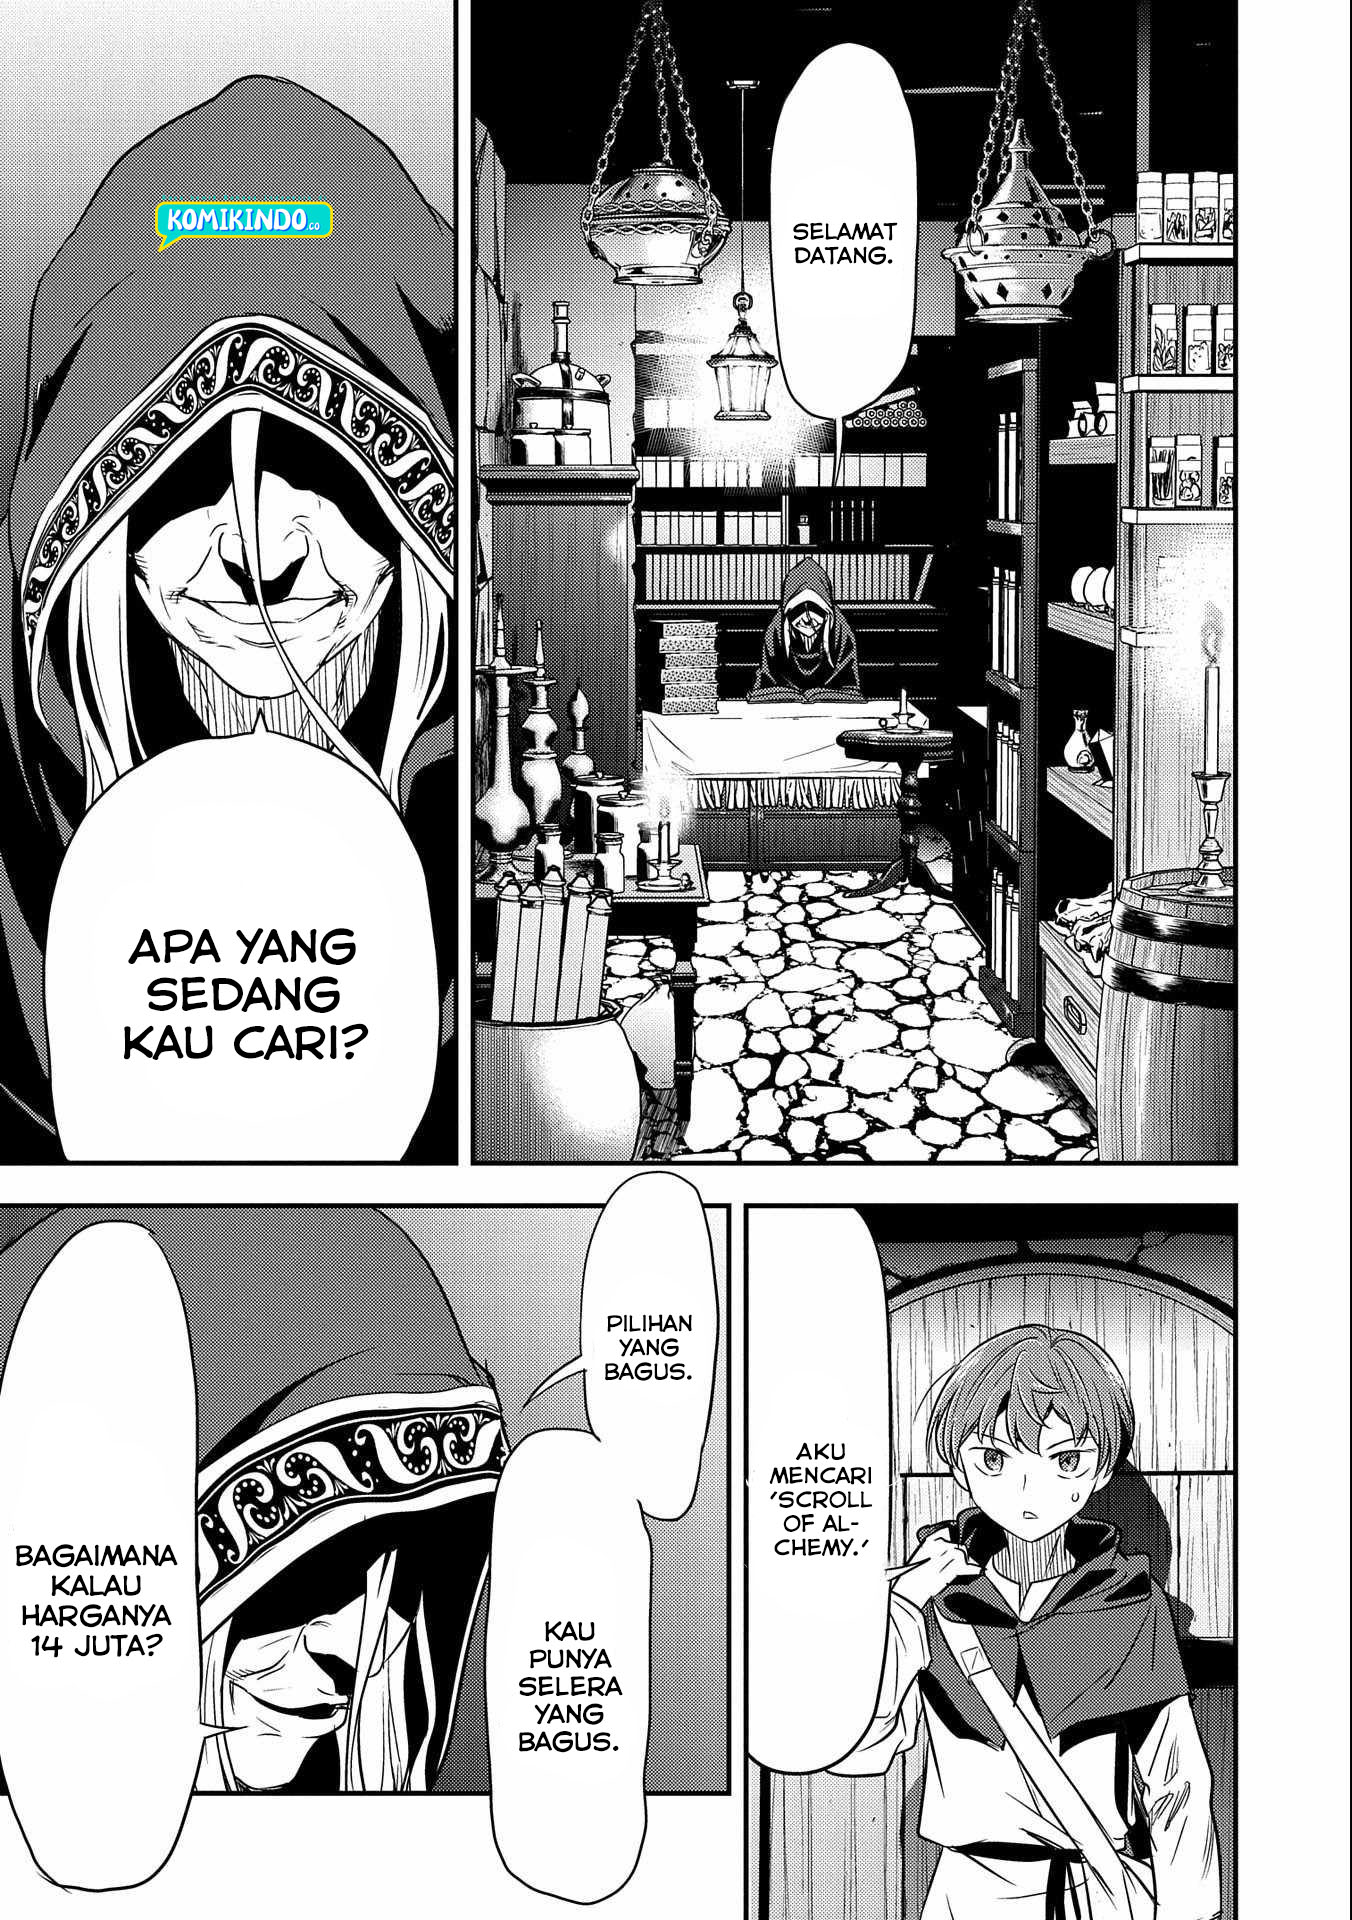 Villager A Wants to Save the Villainess no Matter What! Chapter 04